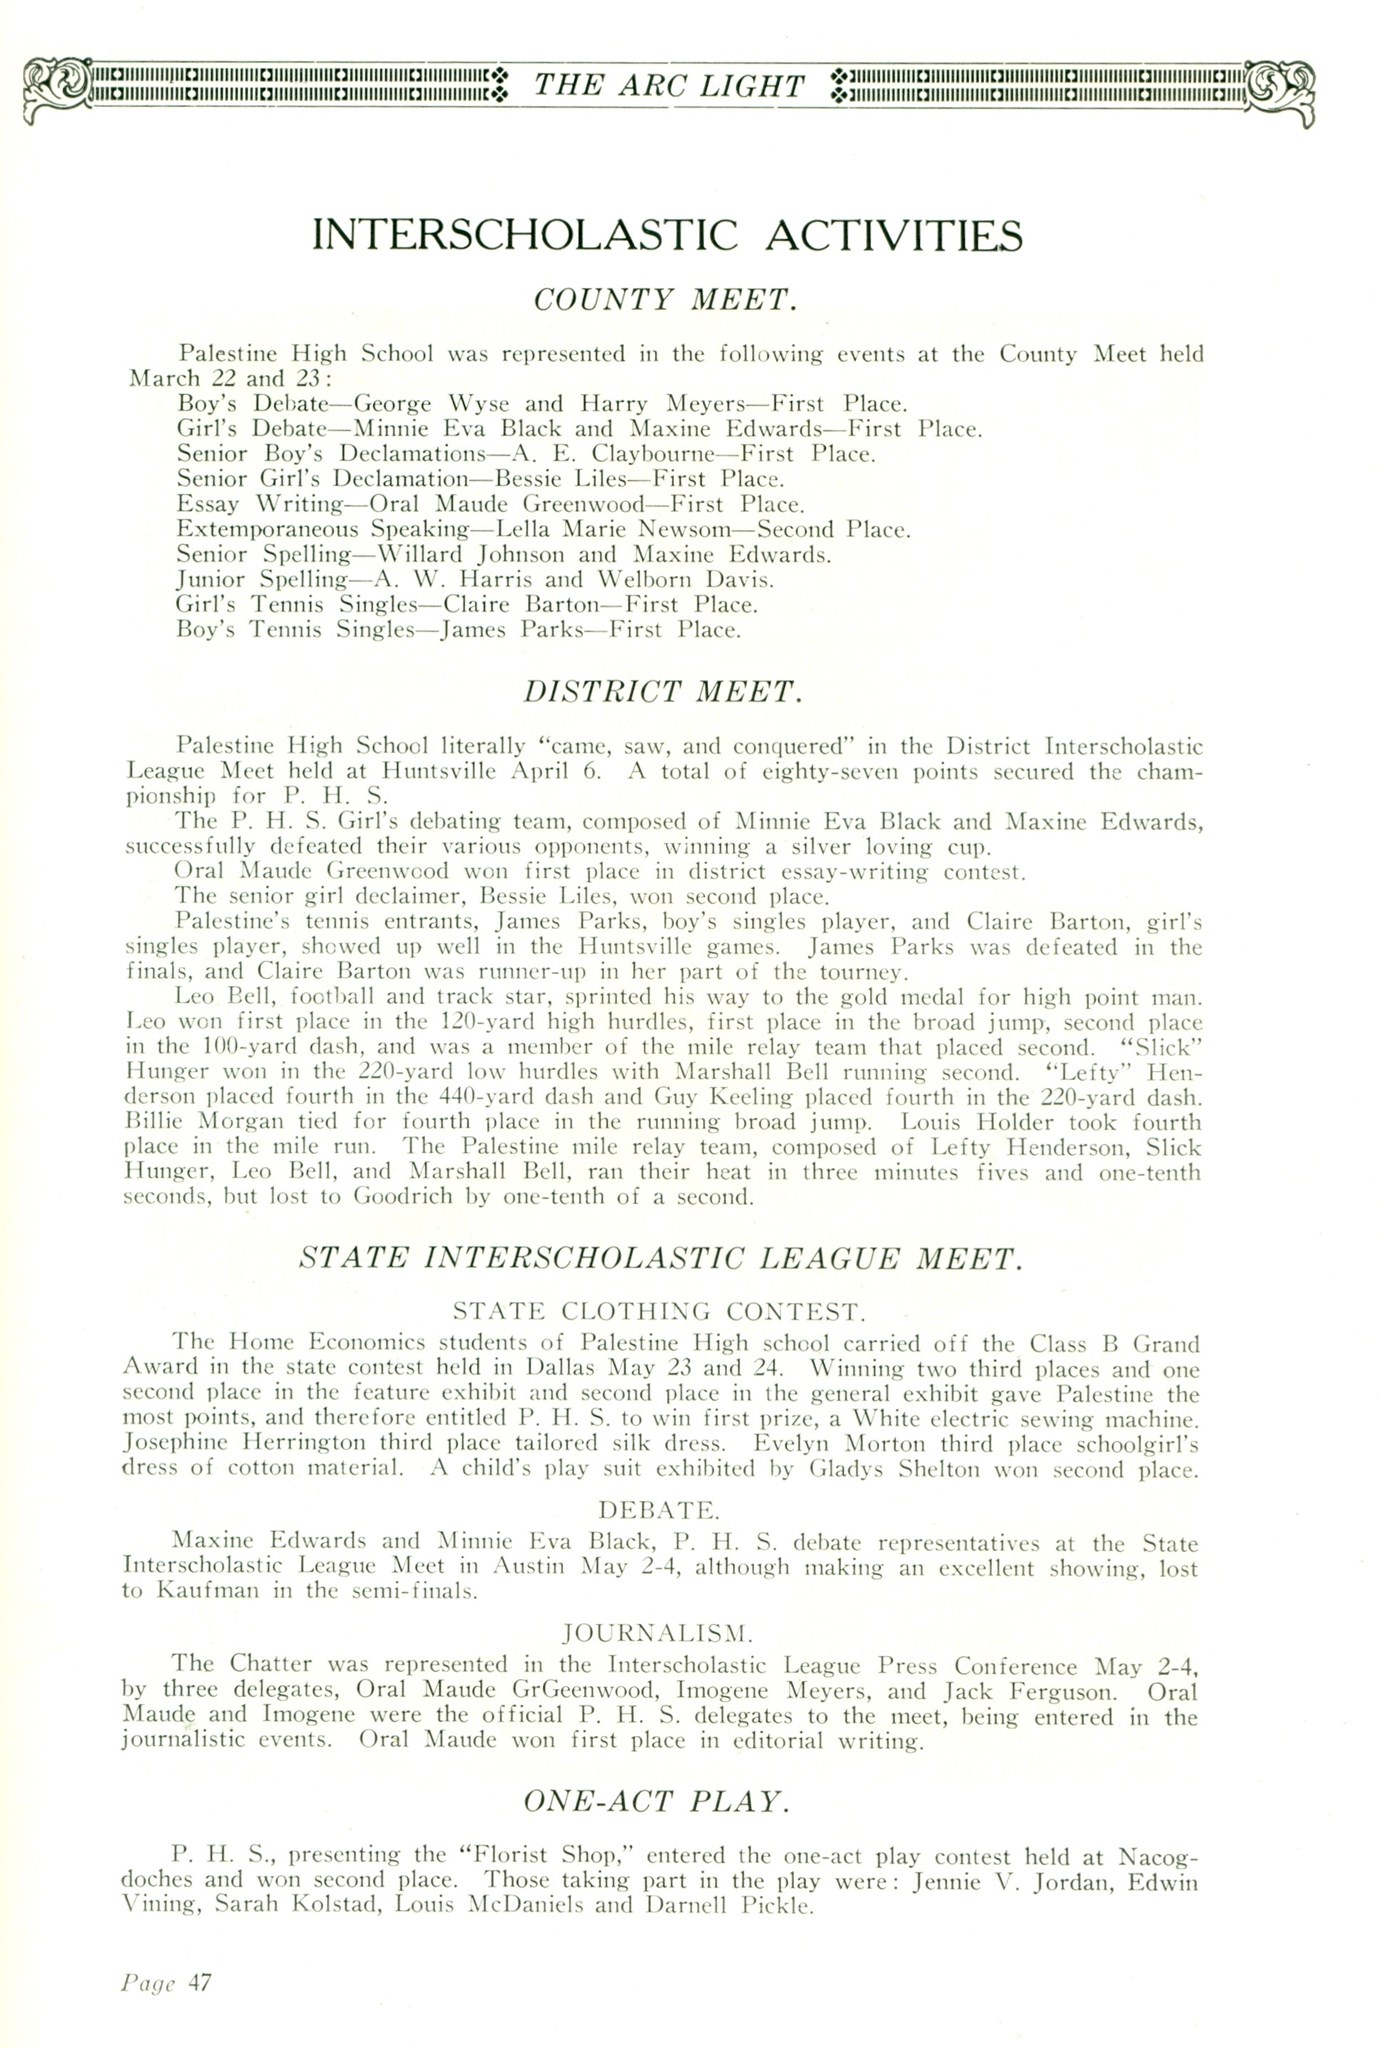 ../../../Images/Large/1929/Arclight-1929-pg0047.jpg